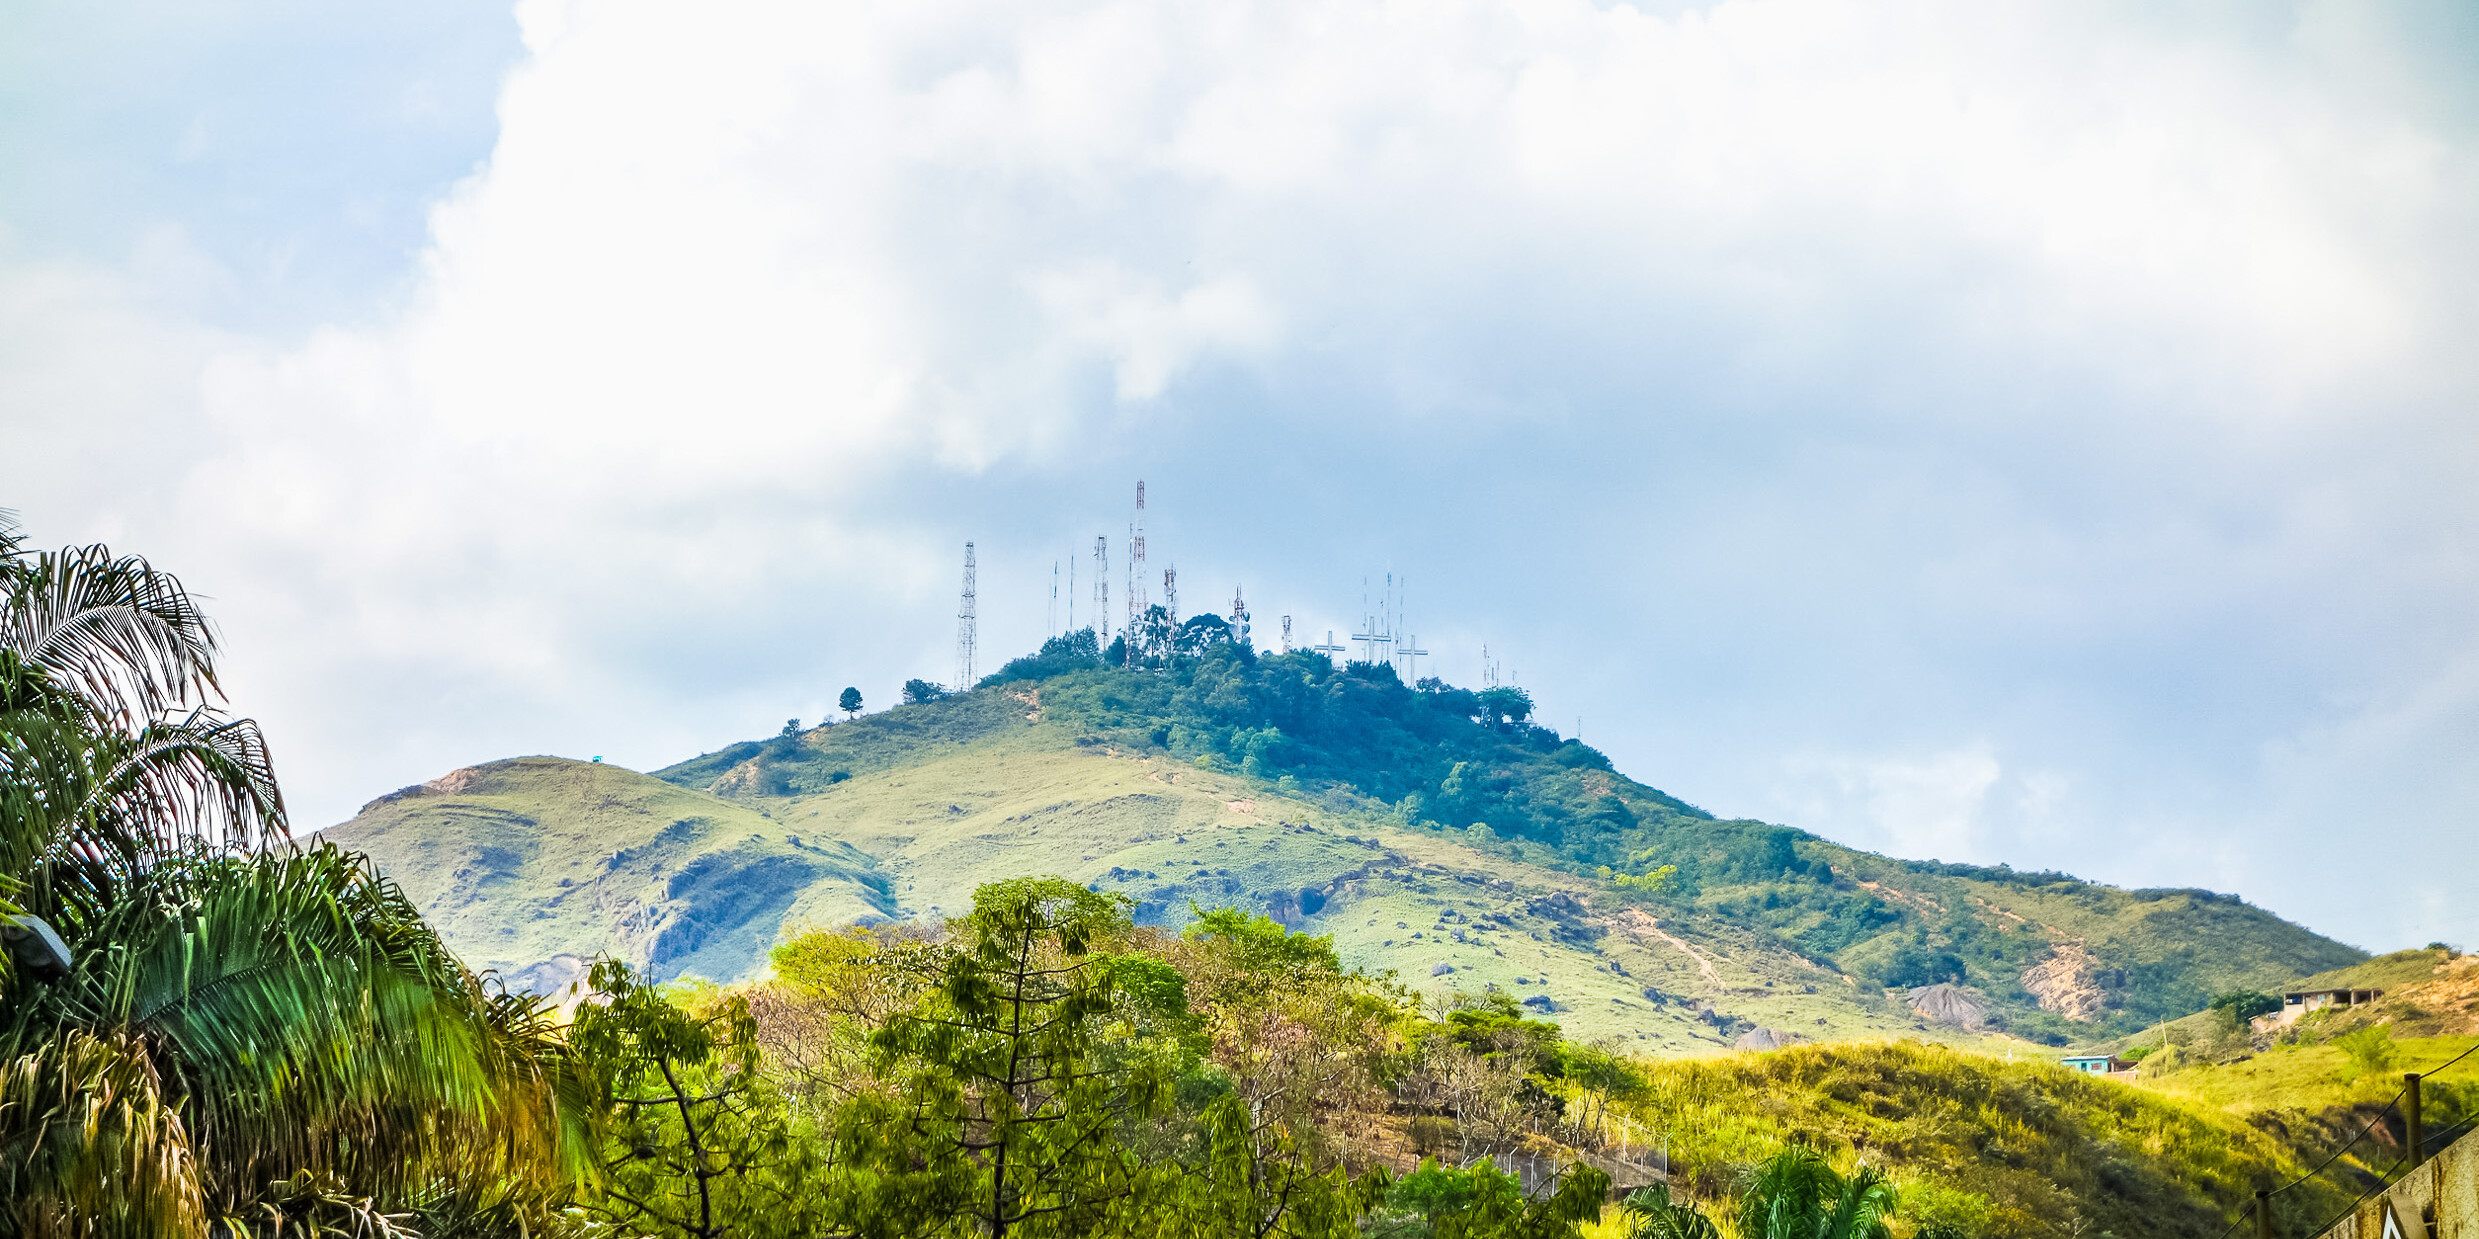 Image of hills with radio towers on top.